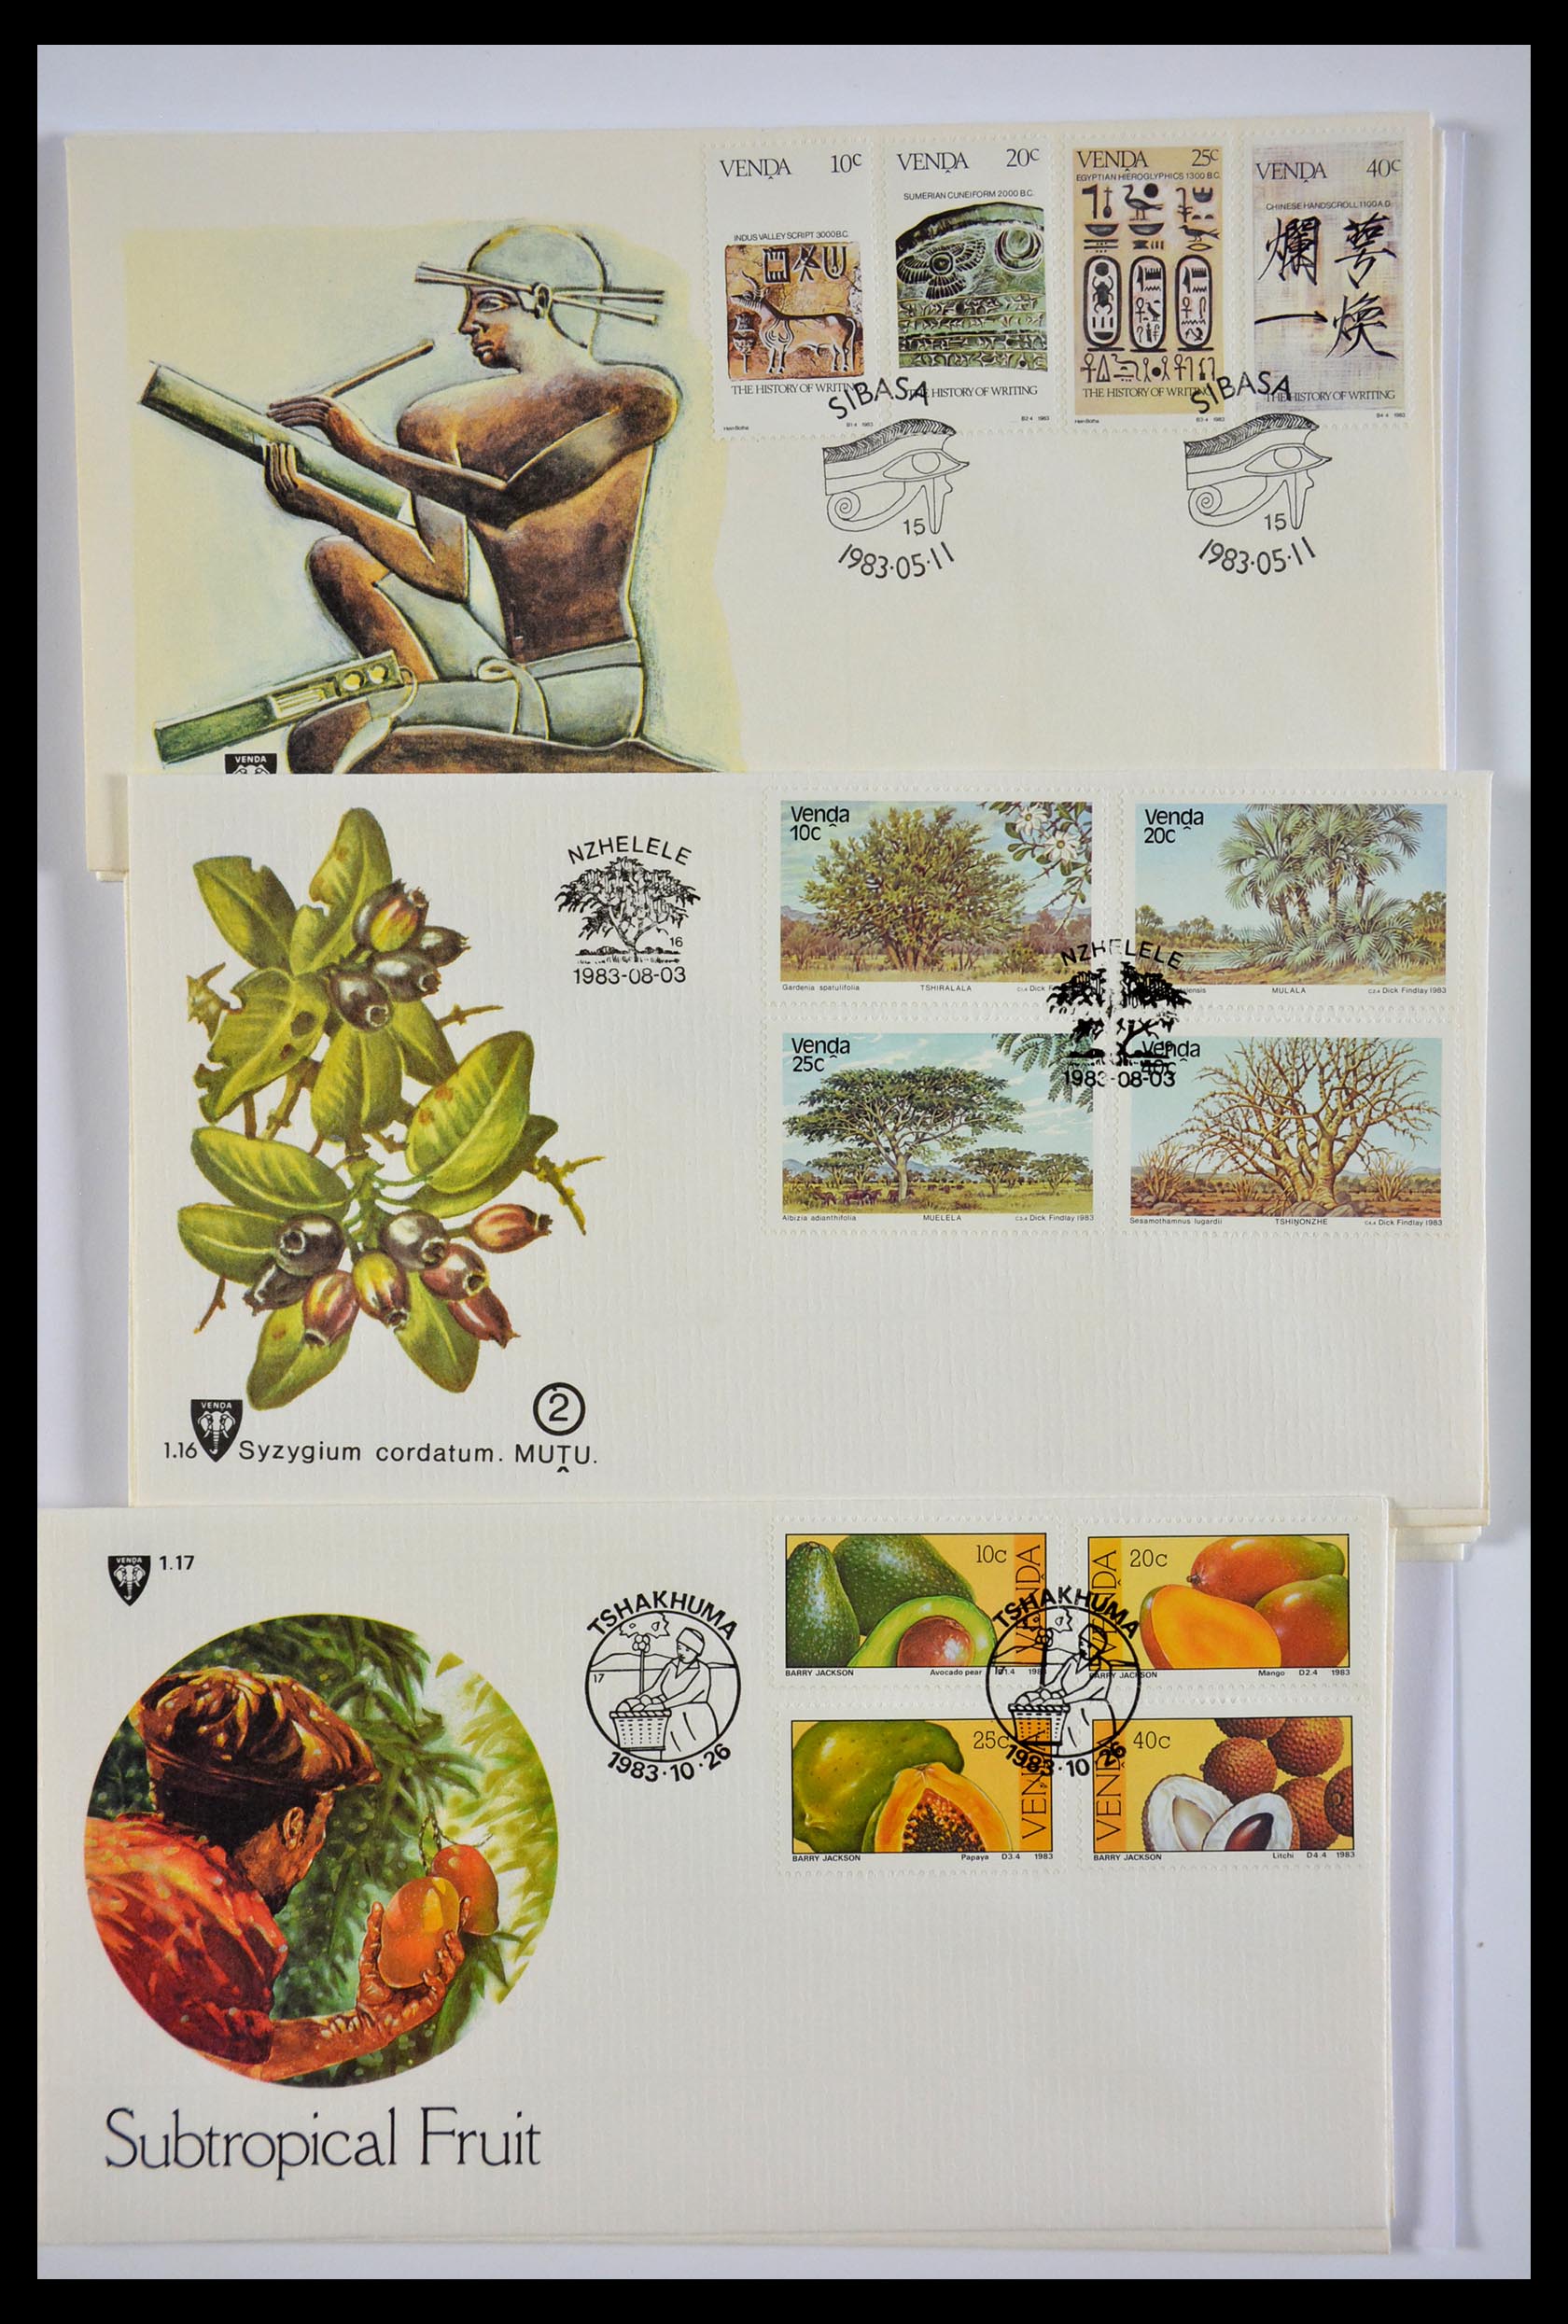 29356 586 - 29356 South Africa homelands first day covers 1979-1991.